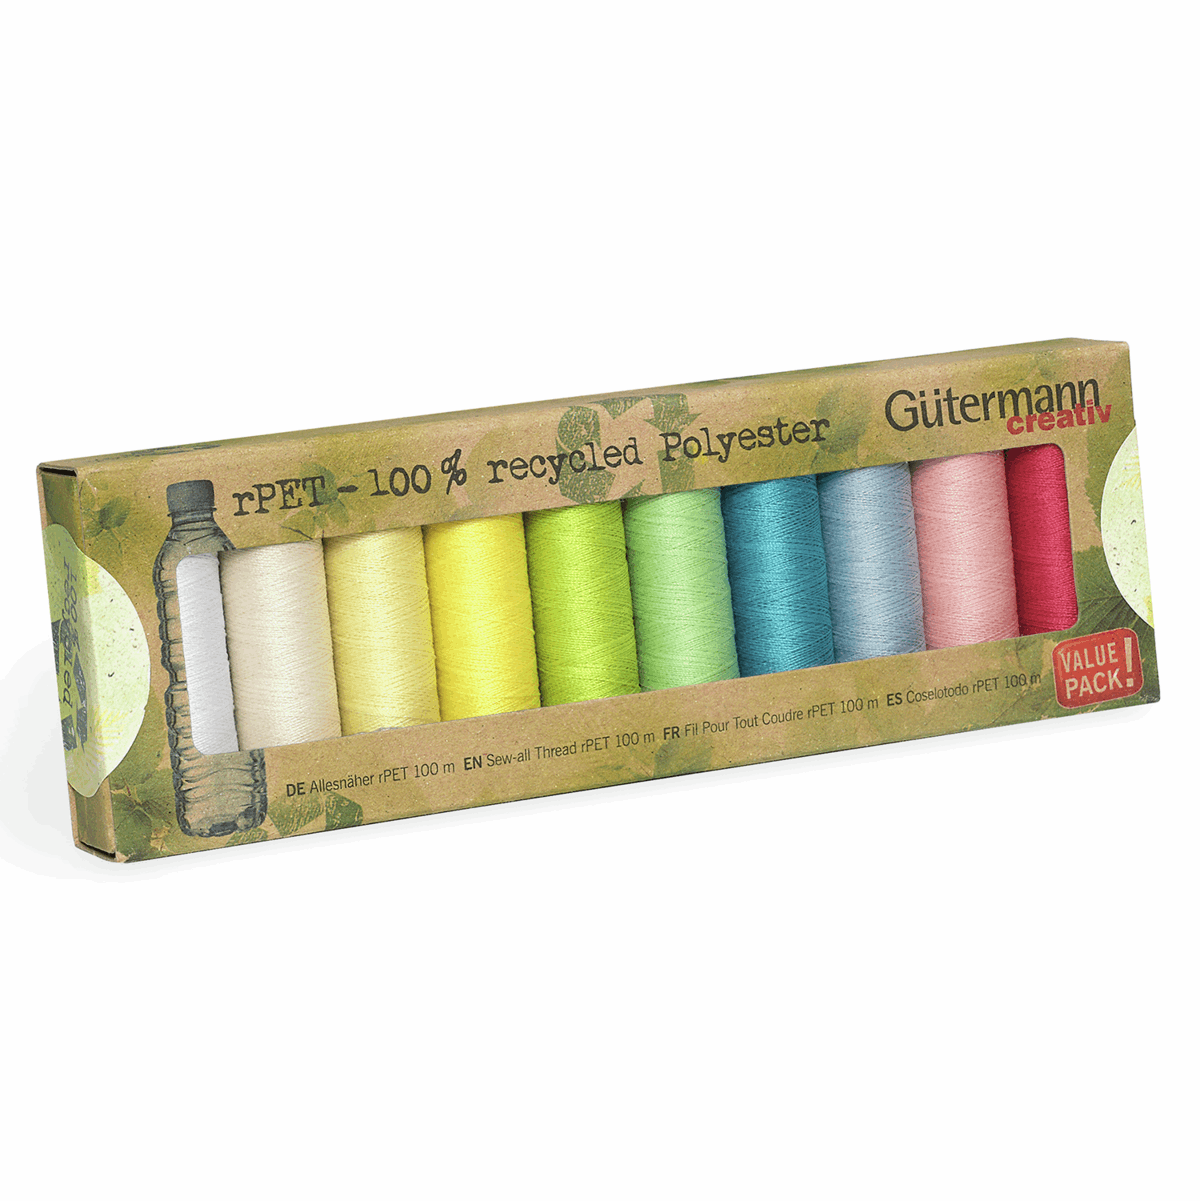 Gutermann Sew-all Thread rPET 100% recycled Polyester (pastels) - 10 x 100m Assorted